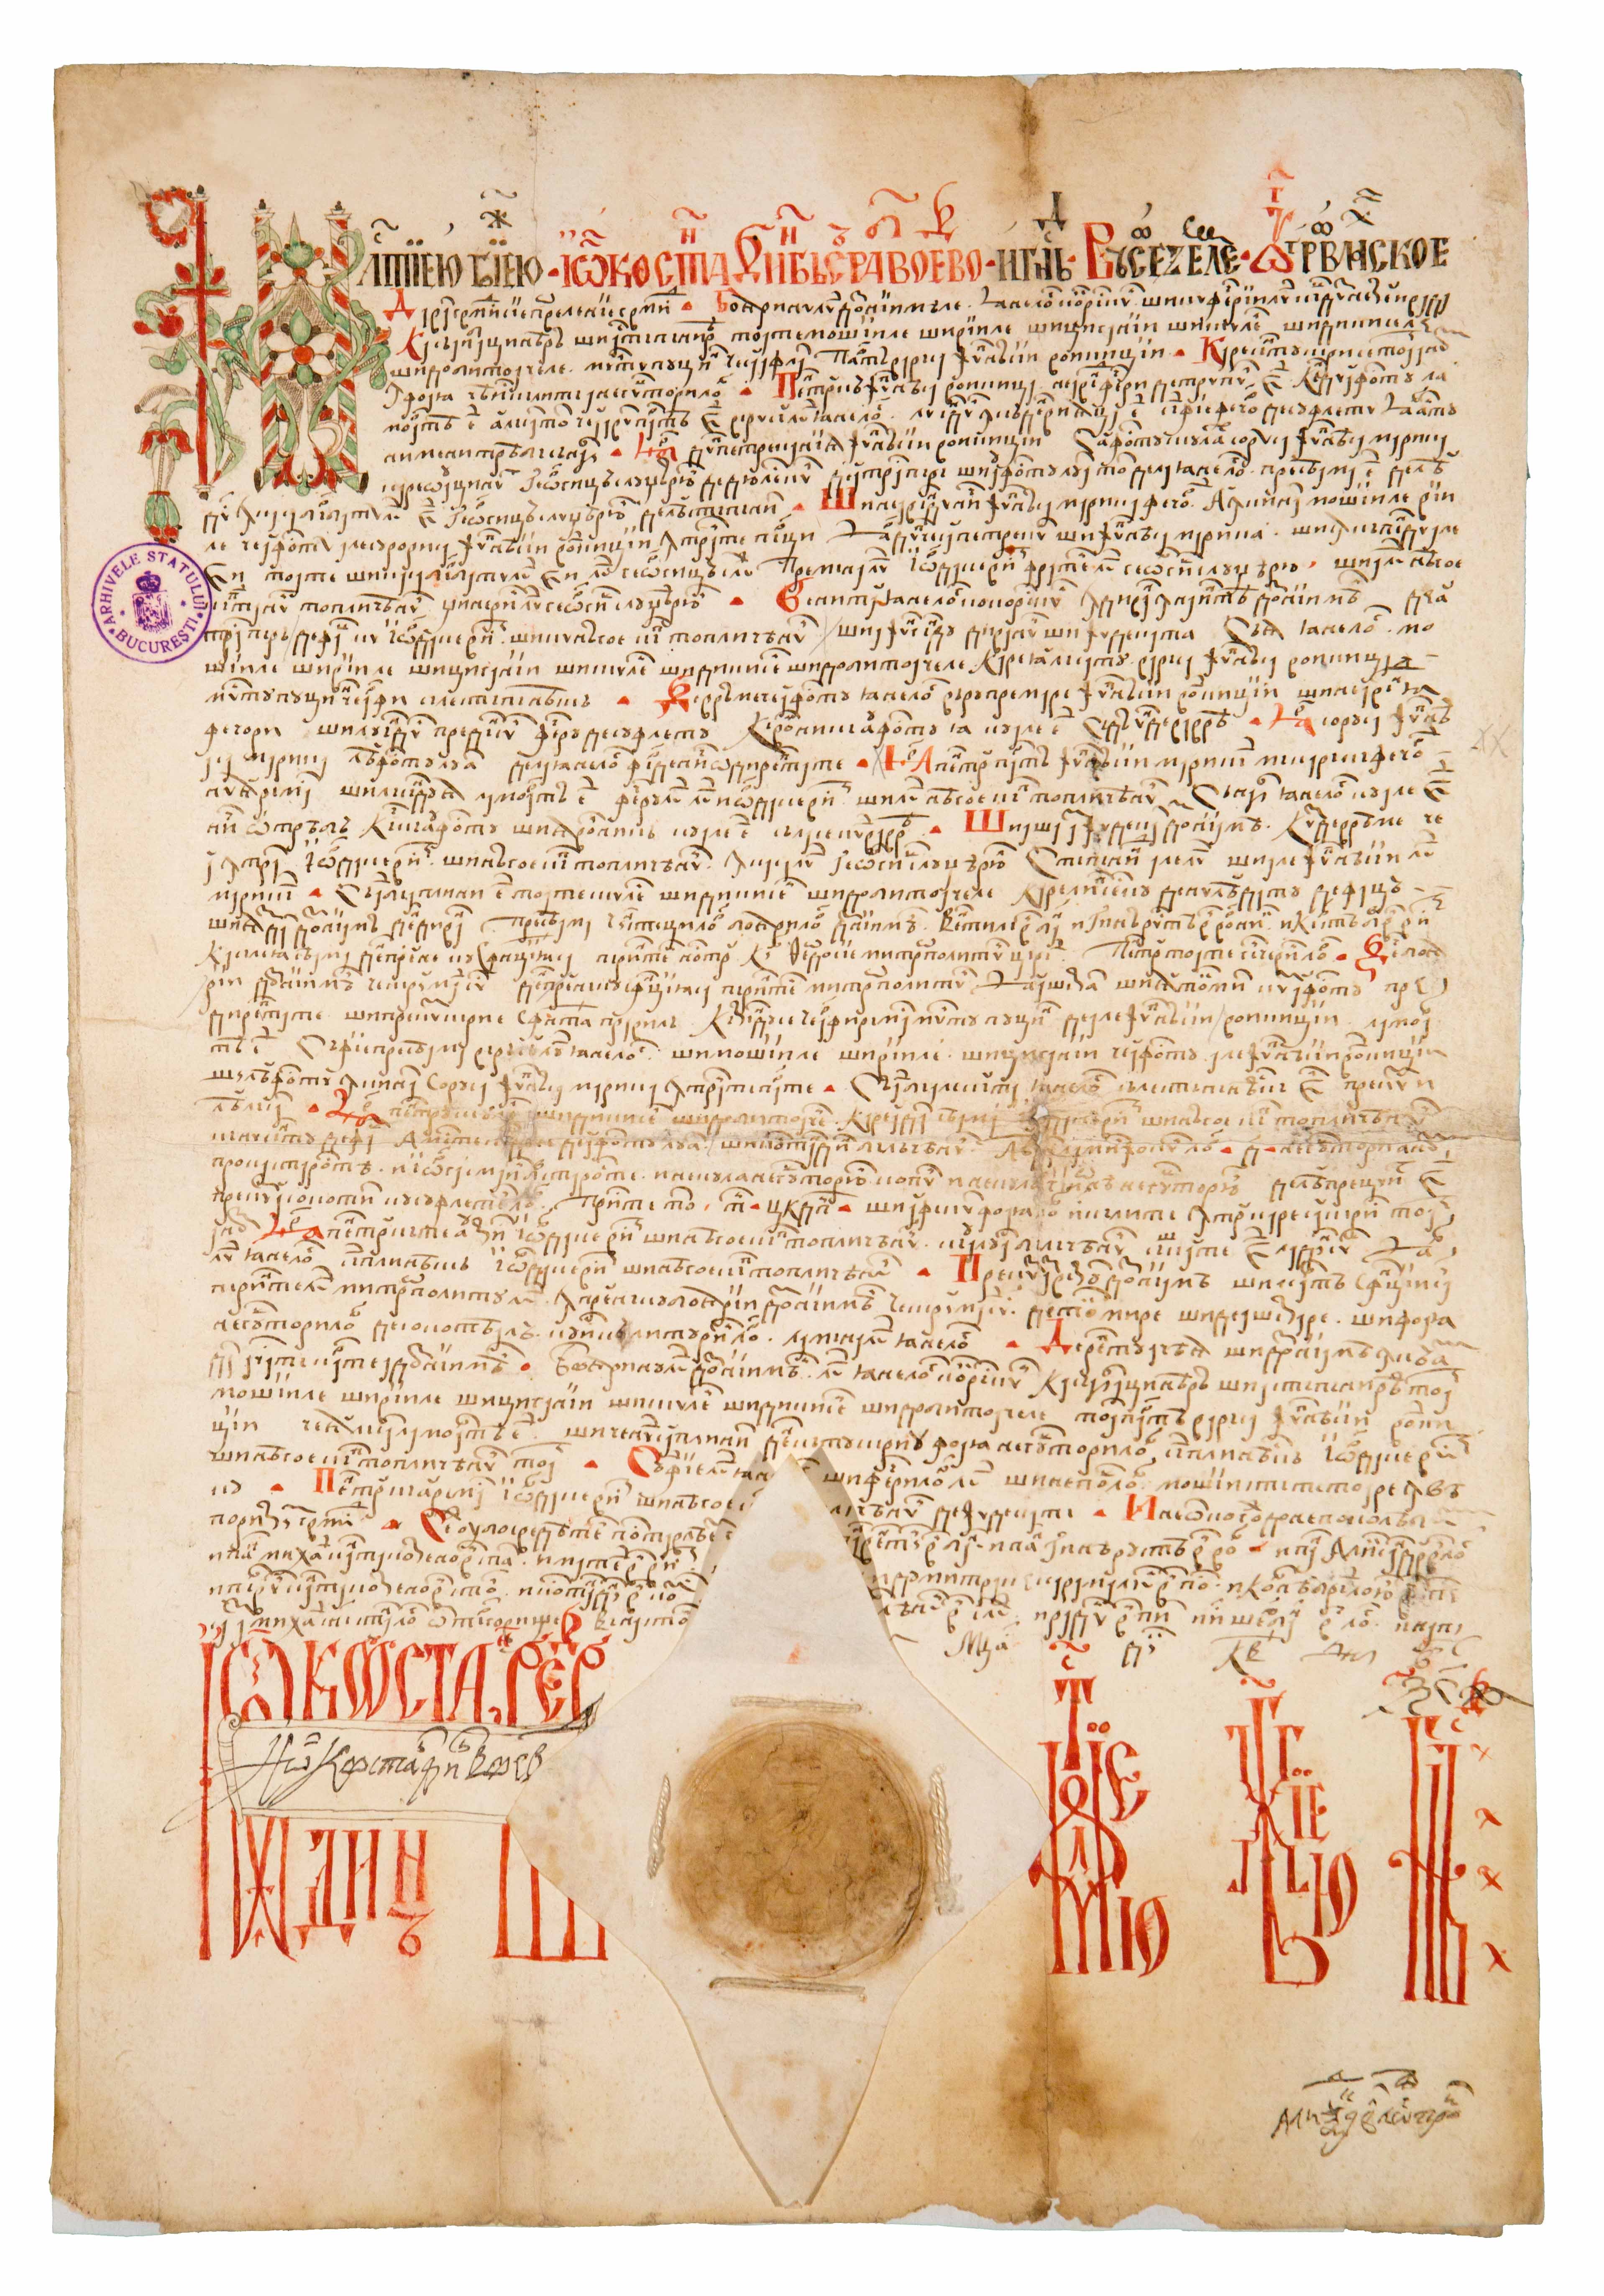 The National Archives, Romania,Constantin Brâncoveanu, ruler of Wallachia, recognizes to logothete Iane Cocorăscu all the properties, vineyards and Roma people, inhereted from his cousin, Voichița. (1691), ref. RO- BU-F-00312-12-72